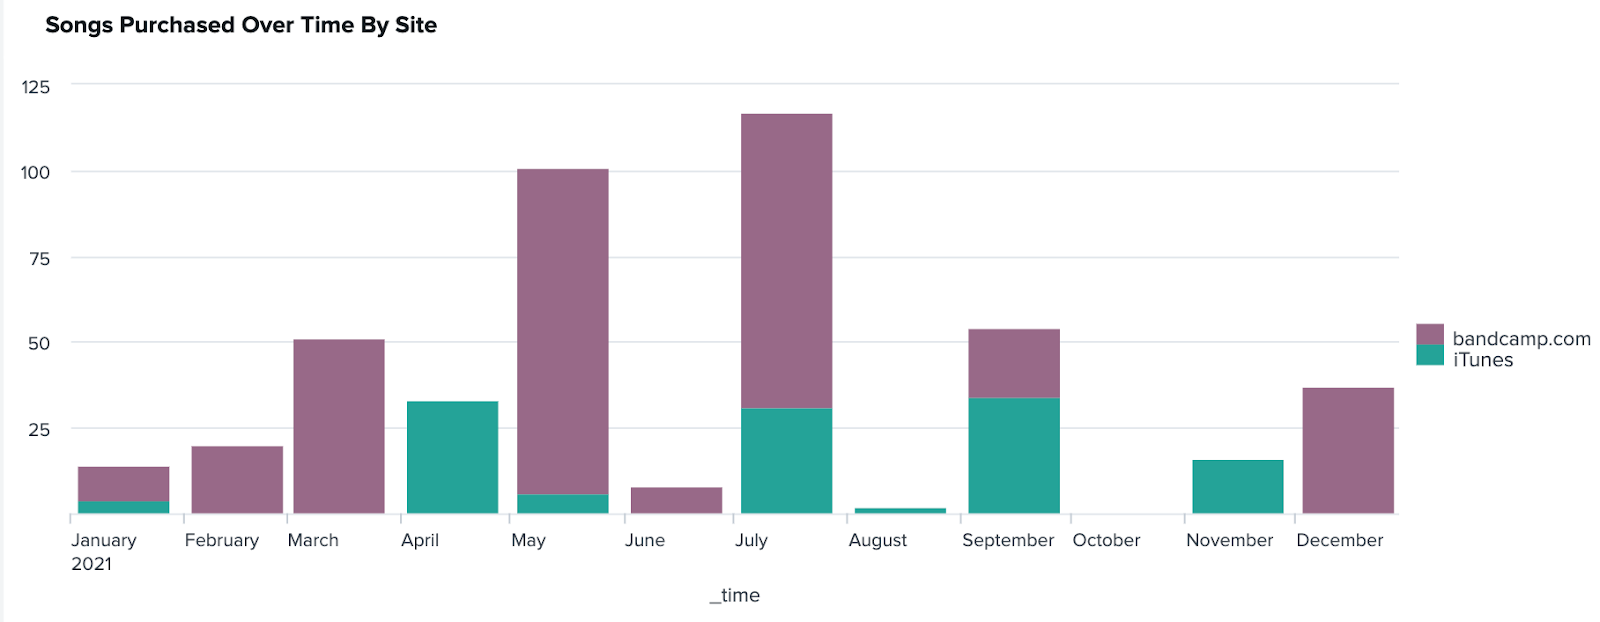 Songs purchased over time by site, largely bandcamp.com tracks with over 100 tracks purchased from both in may and july, over 50 in march and september, and the rest lower than that.